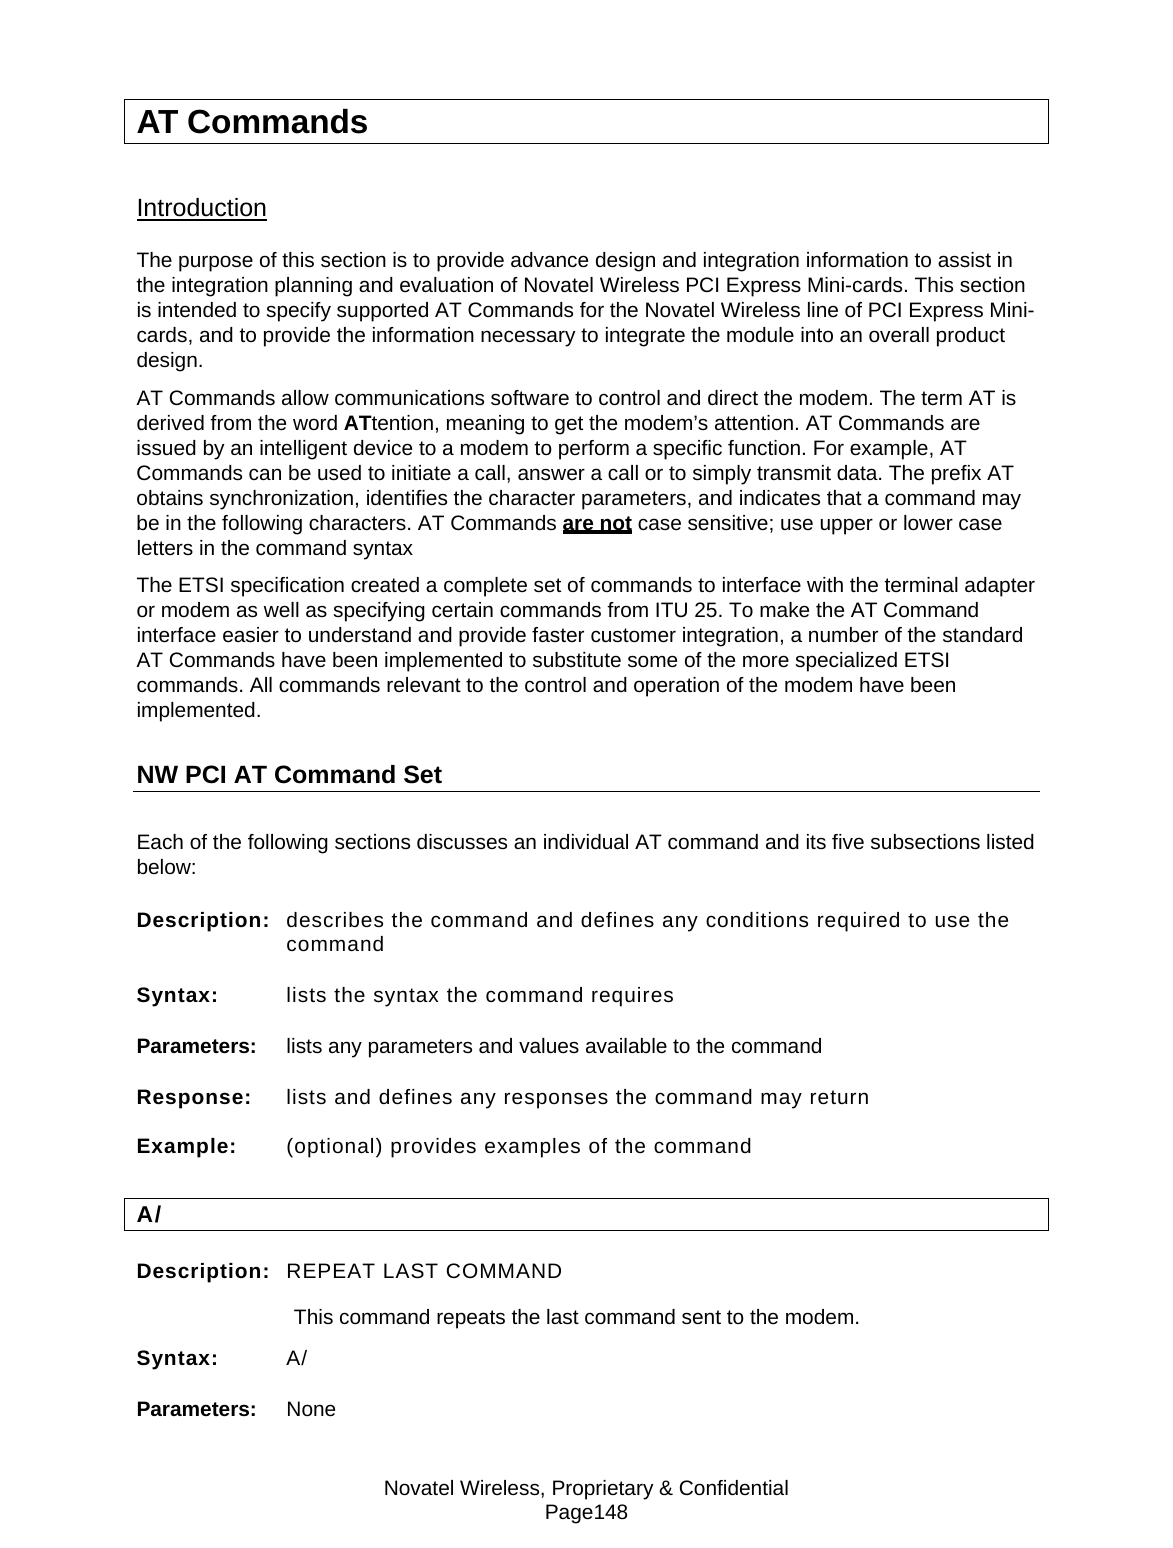 Novatel Wireless, Proprietary &amp; Confidential Page148 AT Commands Introduction The purpose of this section is to provide advance design and integration information to assist in the integration planning and evaluation of Novatel Wireless PCI Express Mini-cards. This section is intended to specify supported AT Commands for the Novatel Wireless line of PCI Express Mini-cards, and to provide the information necessary to integrate the module into an overall product design. AT Commands allow communications software to control and direct the modem. The term AT is derived from the word ATtention, meaning to get the modem’s attention. AT Commands are issued by an intelligent device to a modem to perform a specific function. For example, AT Commands can be used to initiate a call, answer a call or to simply transmit data. The prefix AT obtains synchronization, identifies the character parameters, and indicates that a command may be in the following characters. AT Commands are not case sensitive; use upper or lower case letters in the command syntax The ETSI specification created a complete set of commands to interface with the terminal adapter or modem as well as specifying certain commands from ITU 25. To make the AT Command interface easier to understand and provide faster customer integration, a number of the standard AT Commands have been implemented to substitute some of the more specialized ETSI commands. All commands relevant to the control and operation of the modem have been implemented.  NW PCI AT Command Set Each of the following sections discusses an individual AT command and its five subsections listed below: Description:  describes the command and defines any conditions required to use the command Syntax:  lists the syntax the command requires Parameters:  lists any parameters and values available to the command Response:  lists and defines any responses the command may return Example:  (optional) provides examples of the command A/ Description:  REPEAT LAST COMMAND  This command repeats the last command sent to the modem. Syntax:  A/ Parameters:  None 